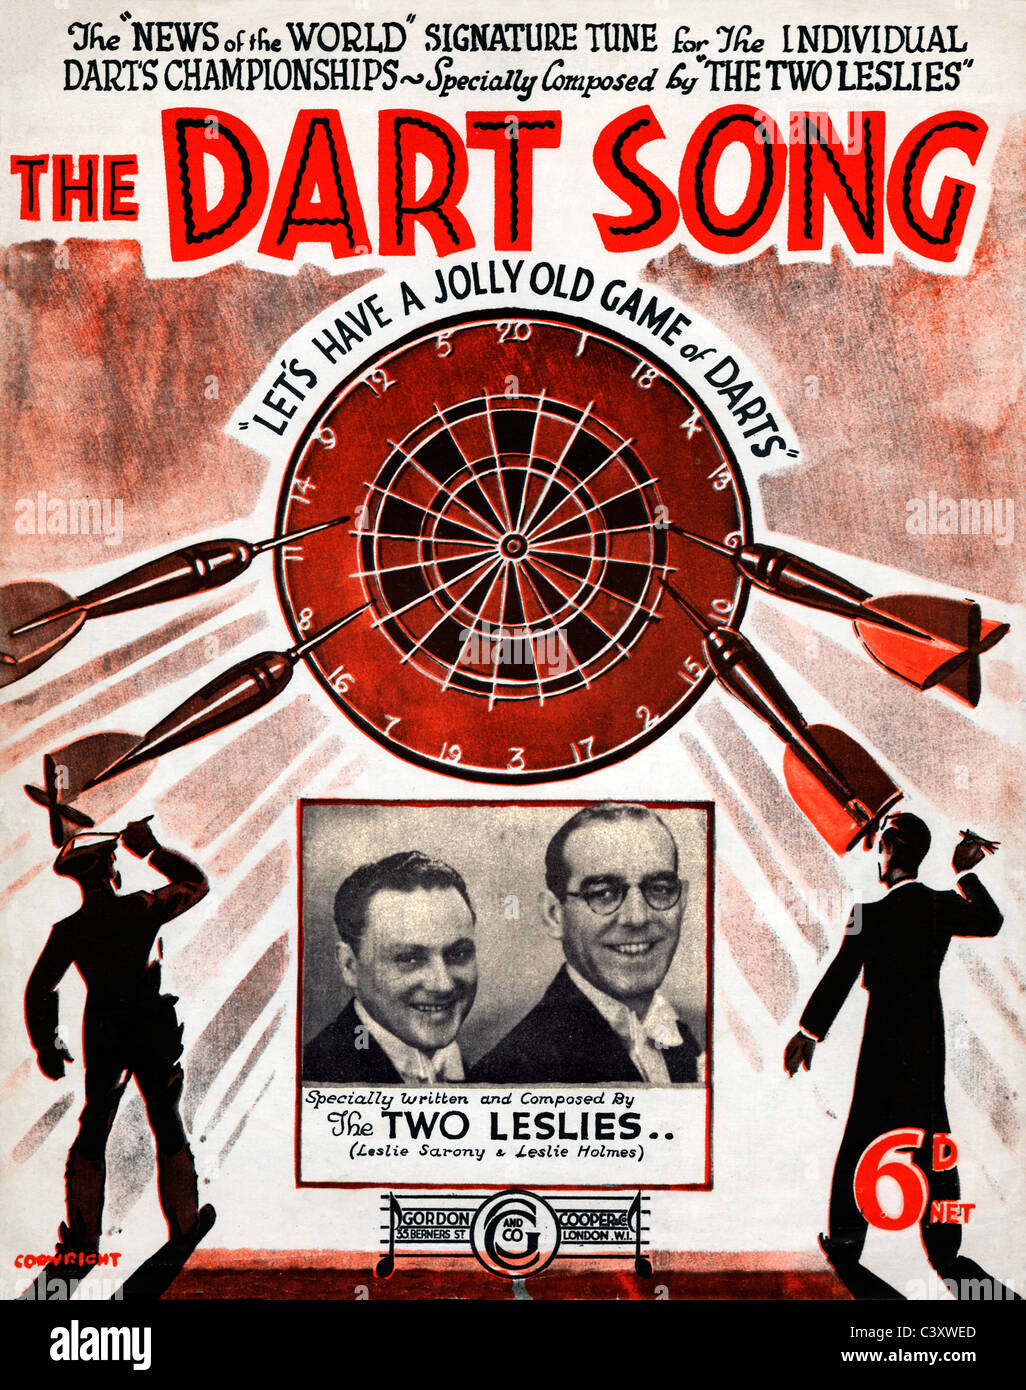 The Dart Song, 1937 music sheet cover for the signature tune specially composed for the Darts Championships Stock Photo